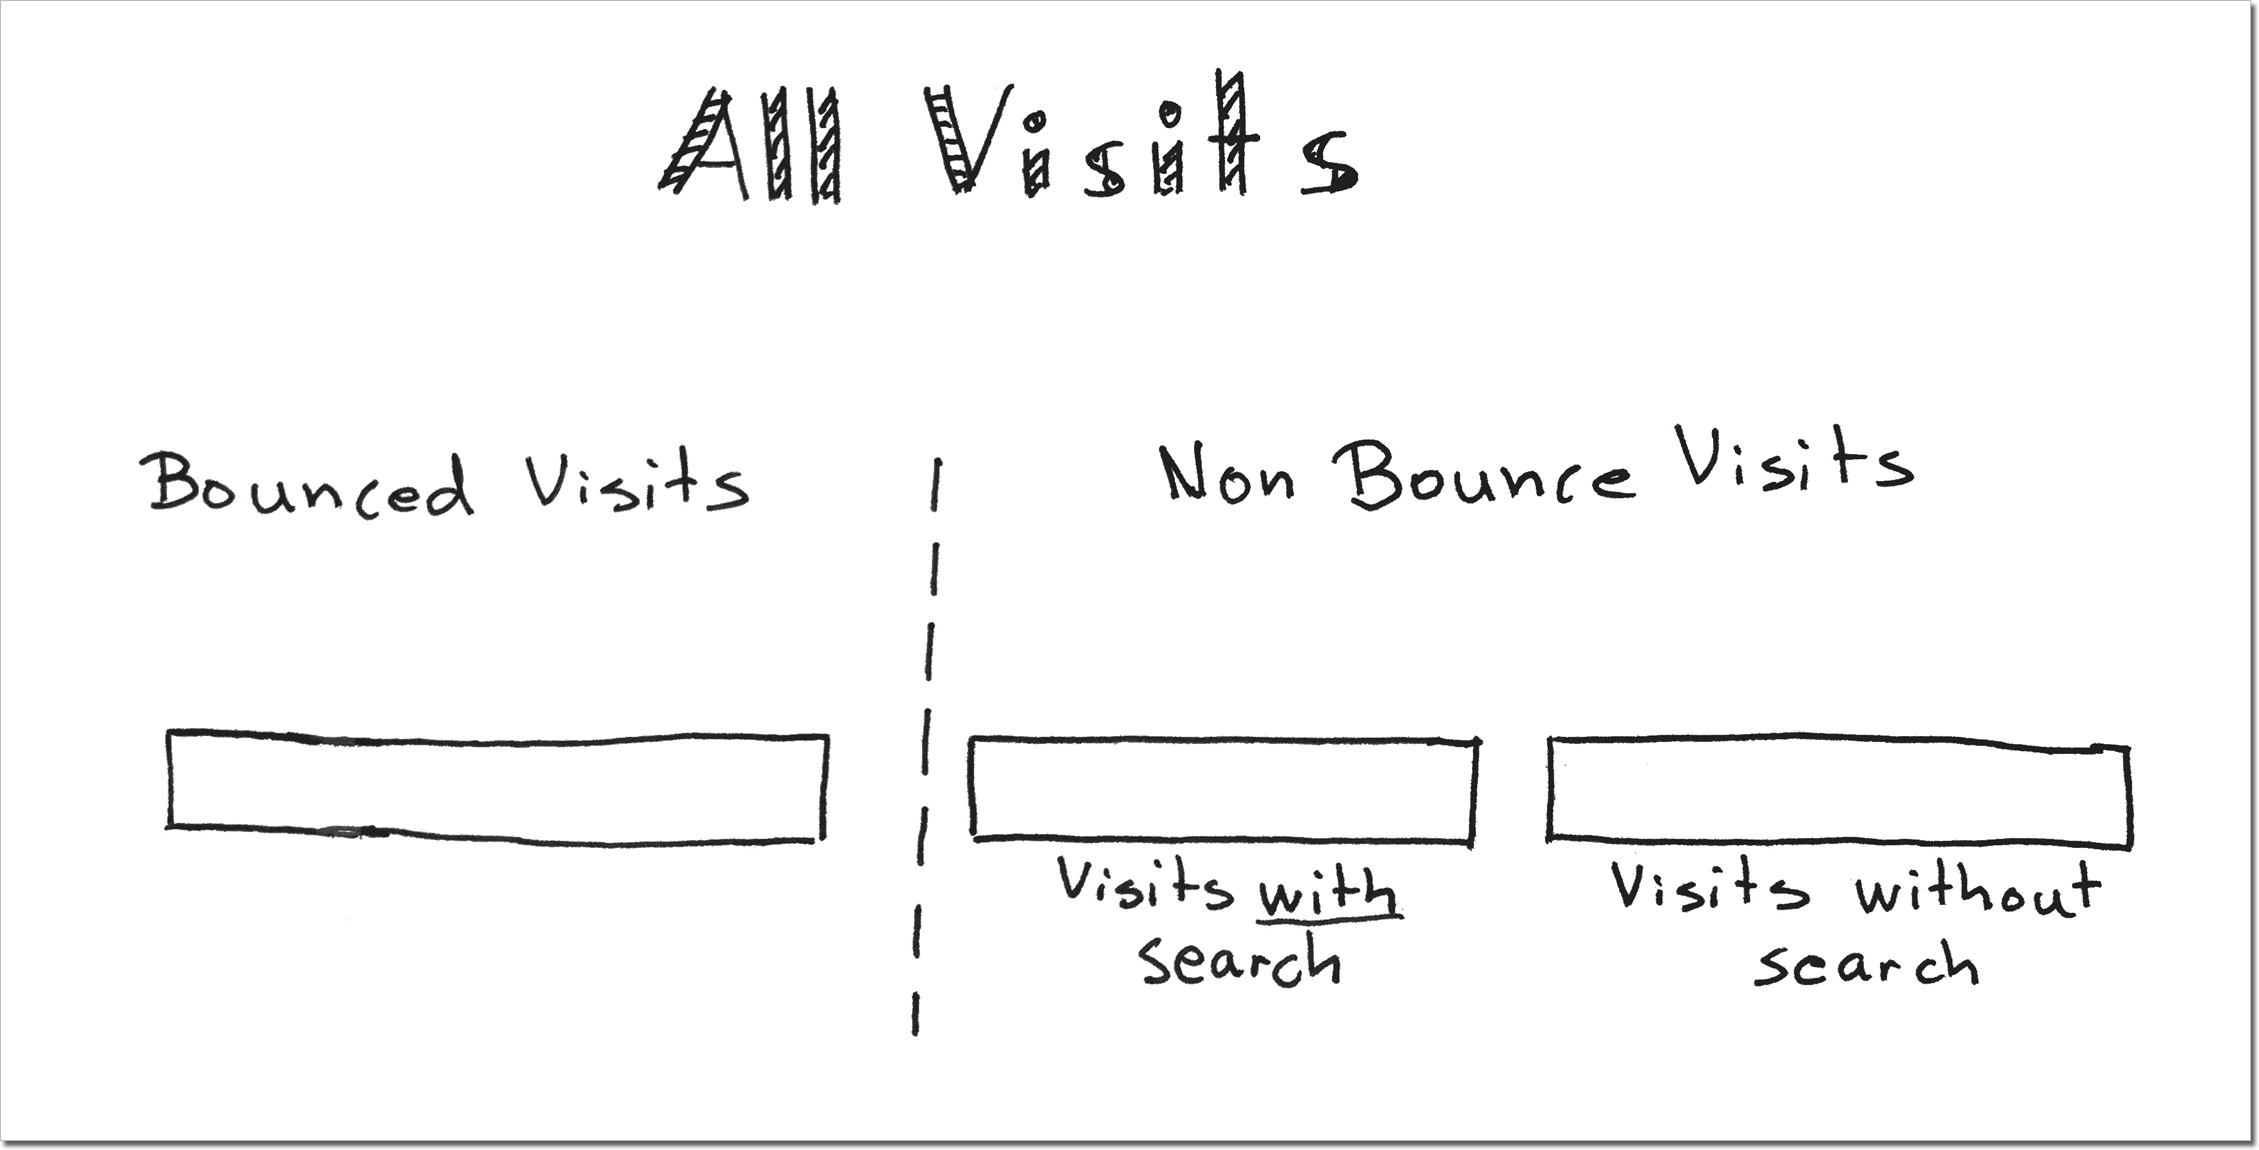 graph showing the proper division of sessions with and without site searches.